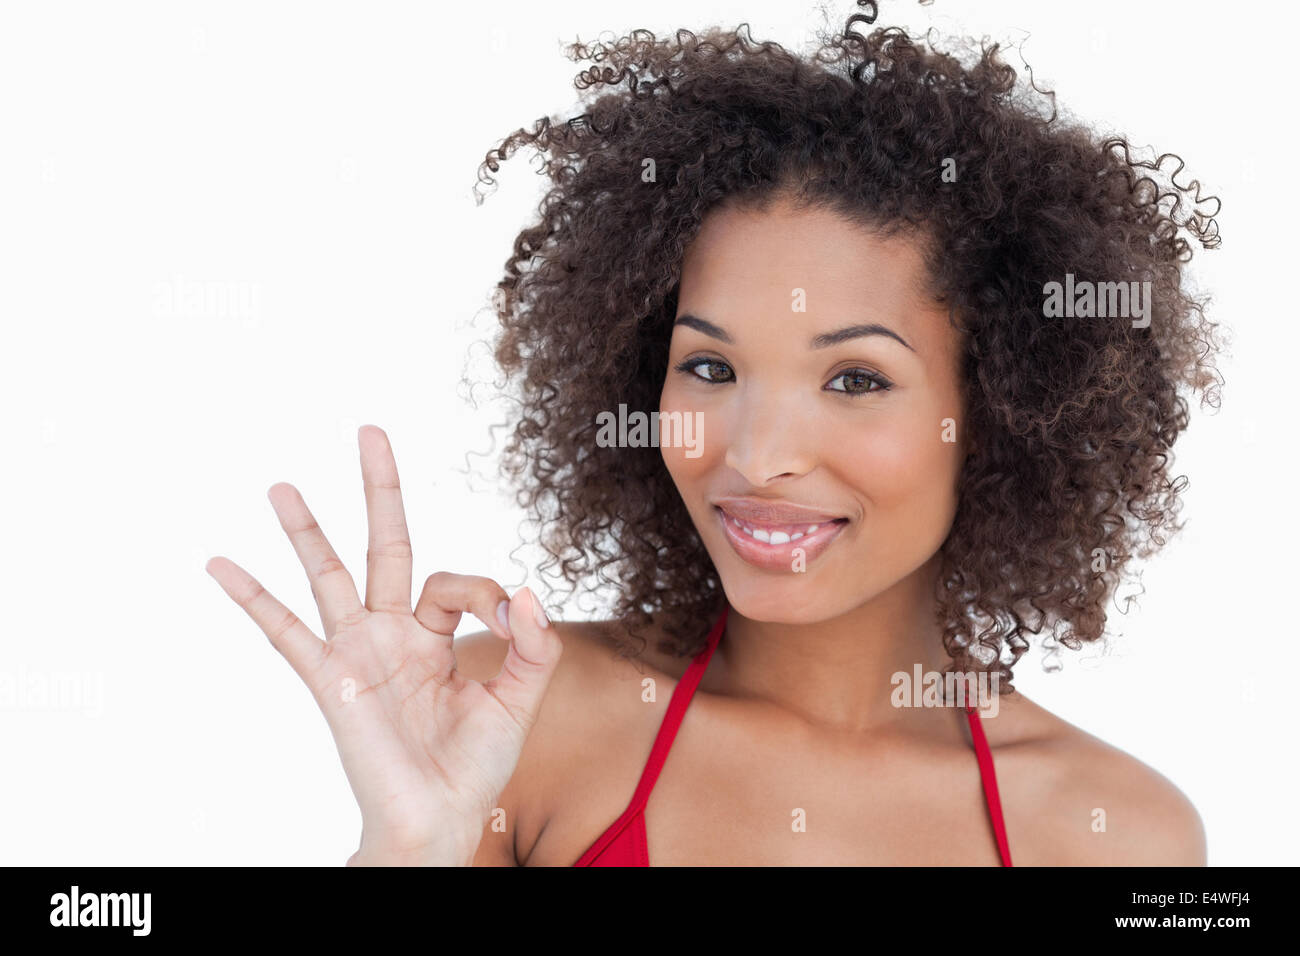 Smiling young woman showing the ok sign Stock Photo